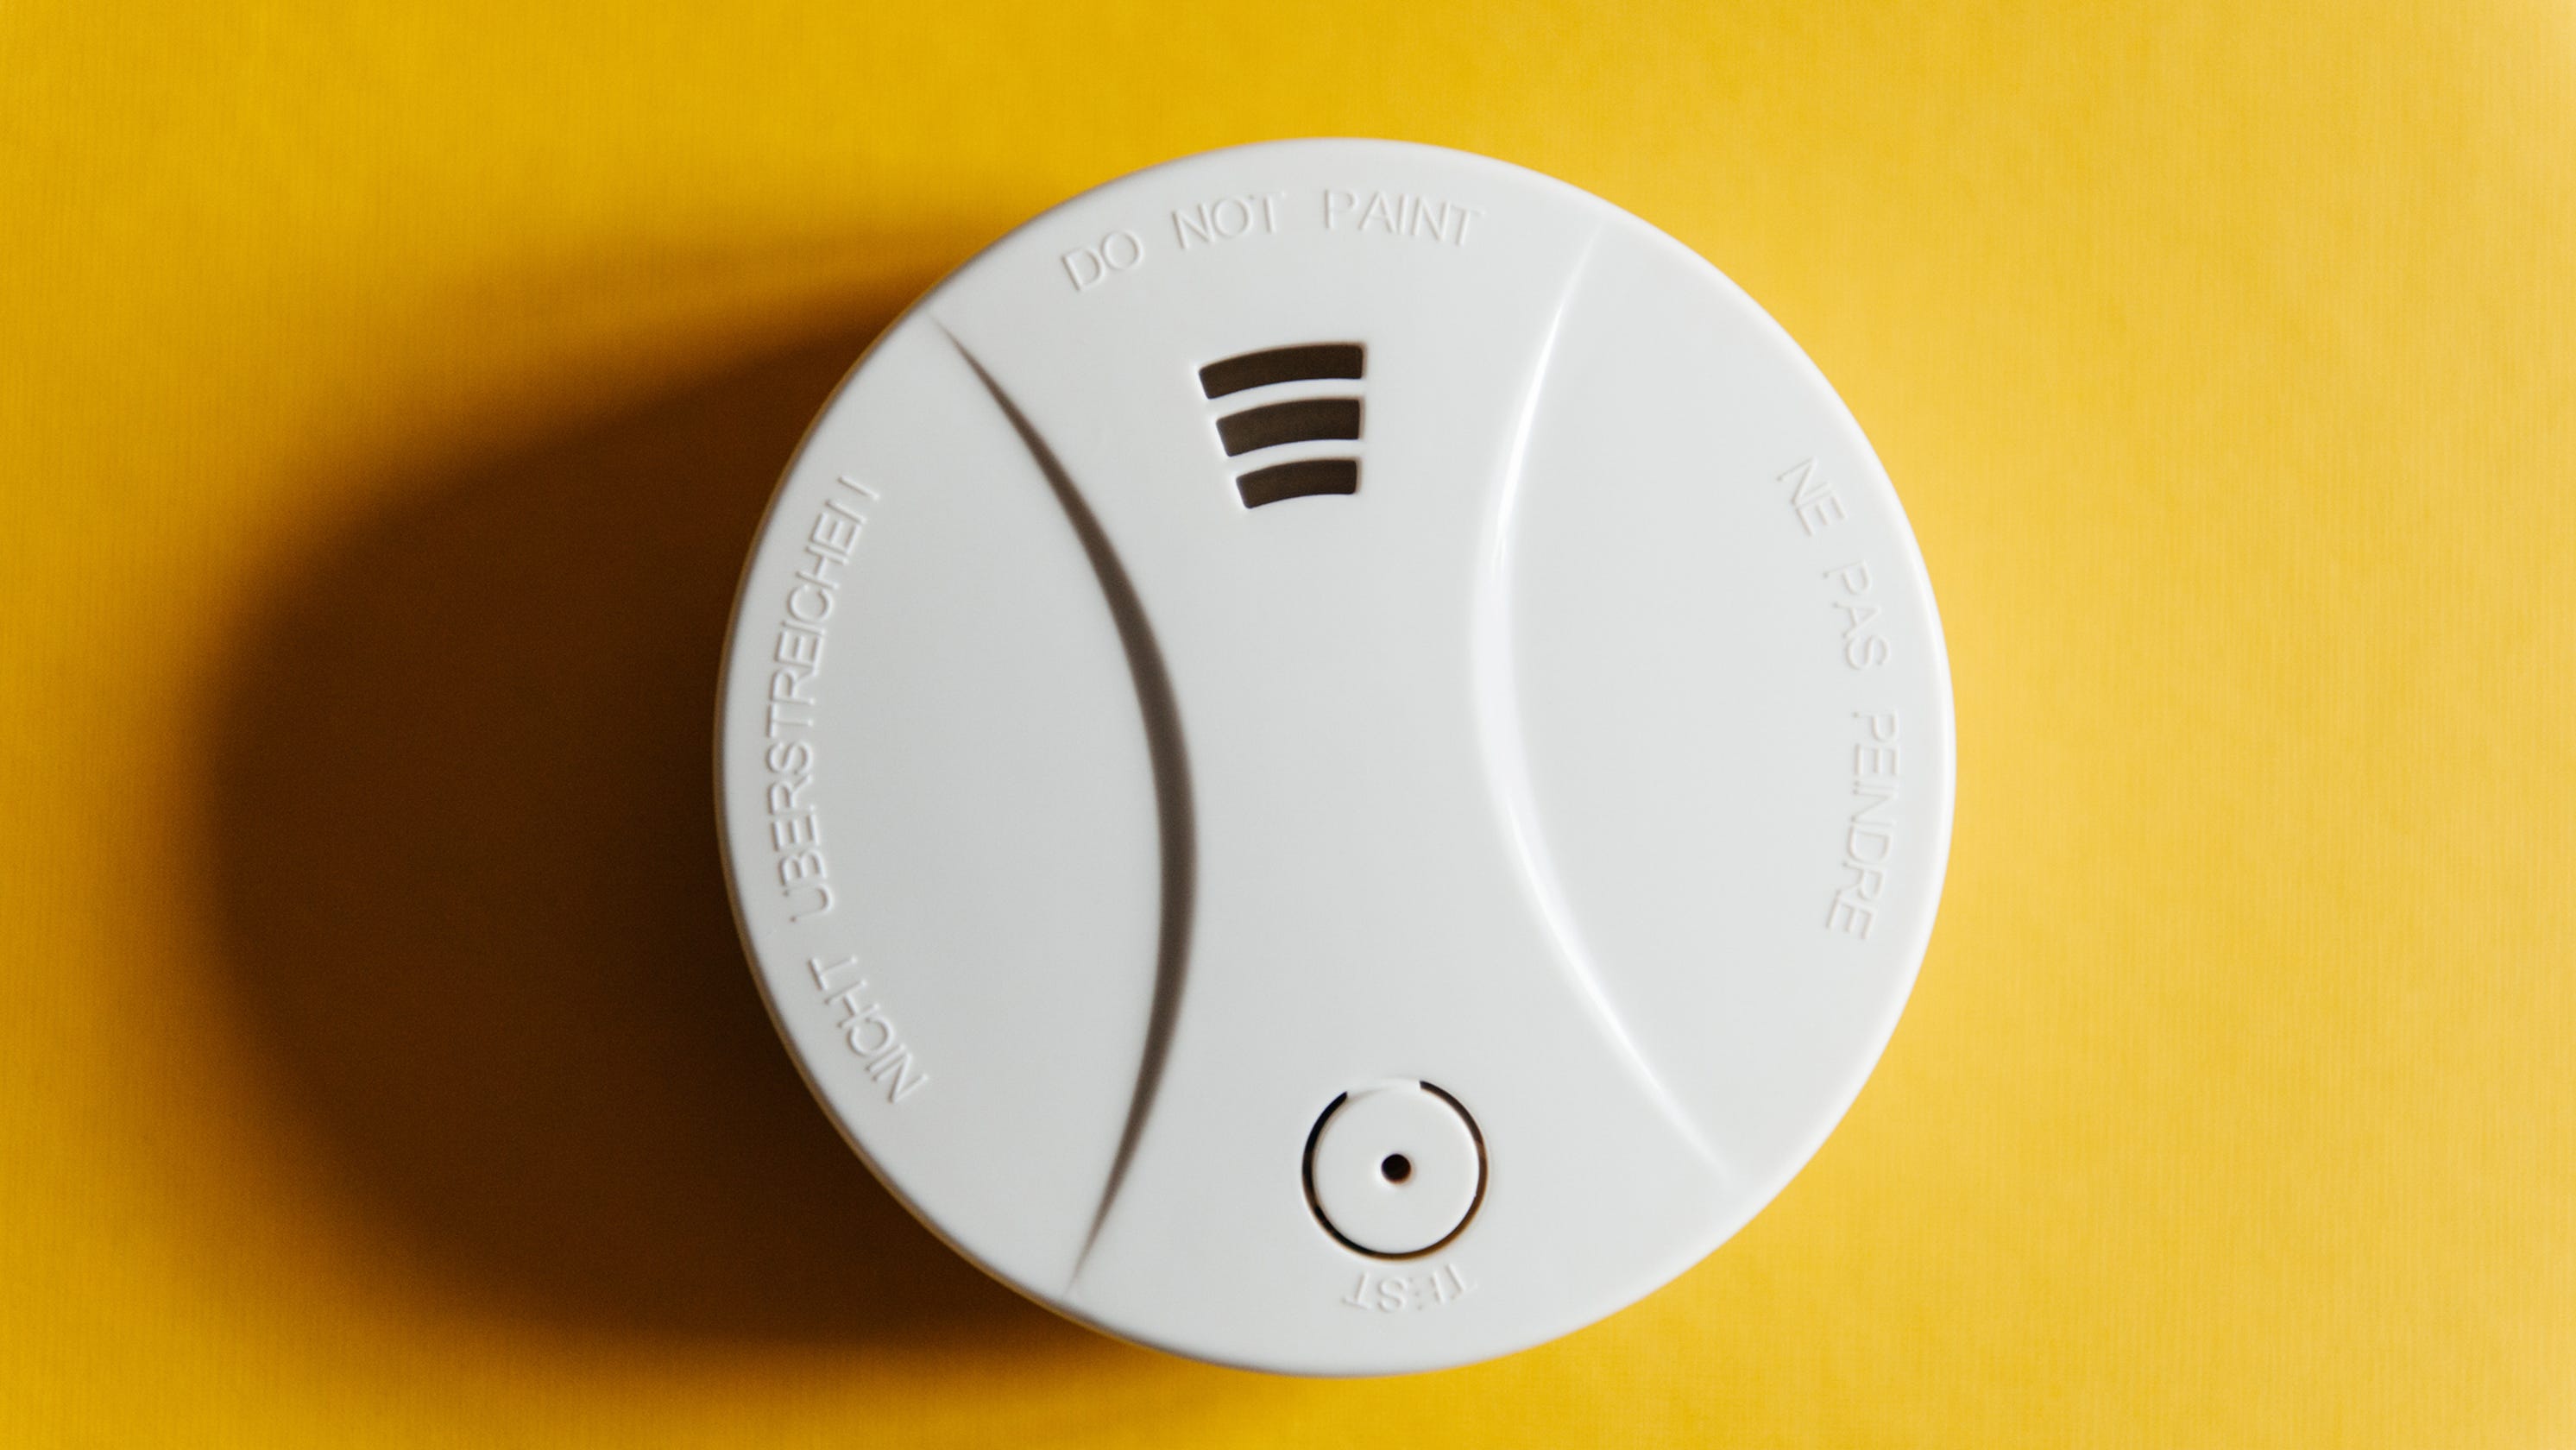 Do you need a smoke alarm? Here's how you can get one for free